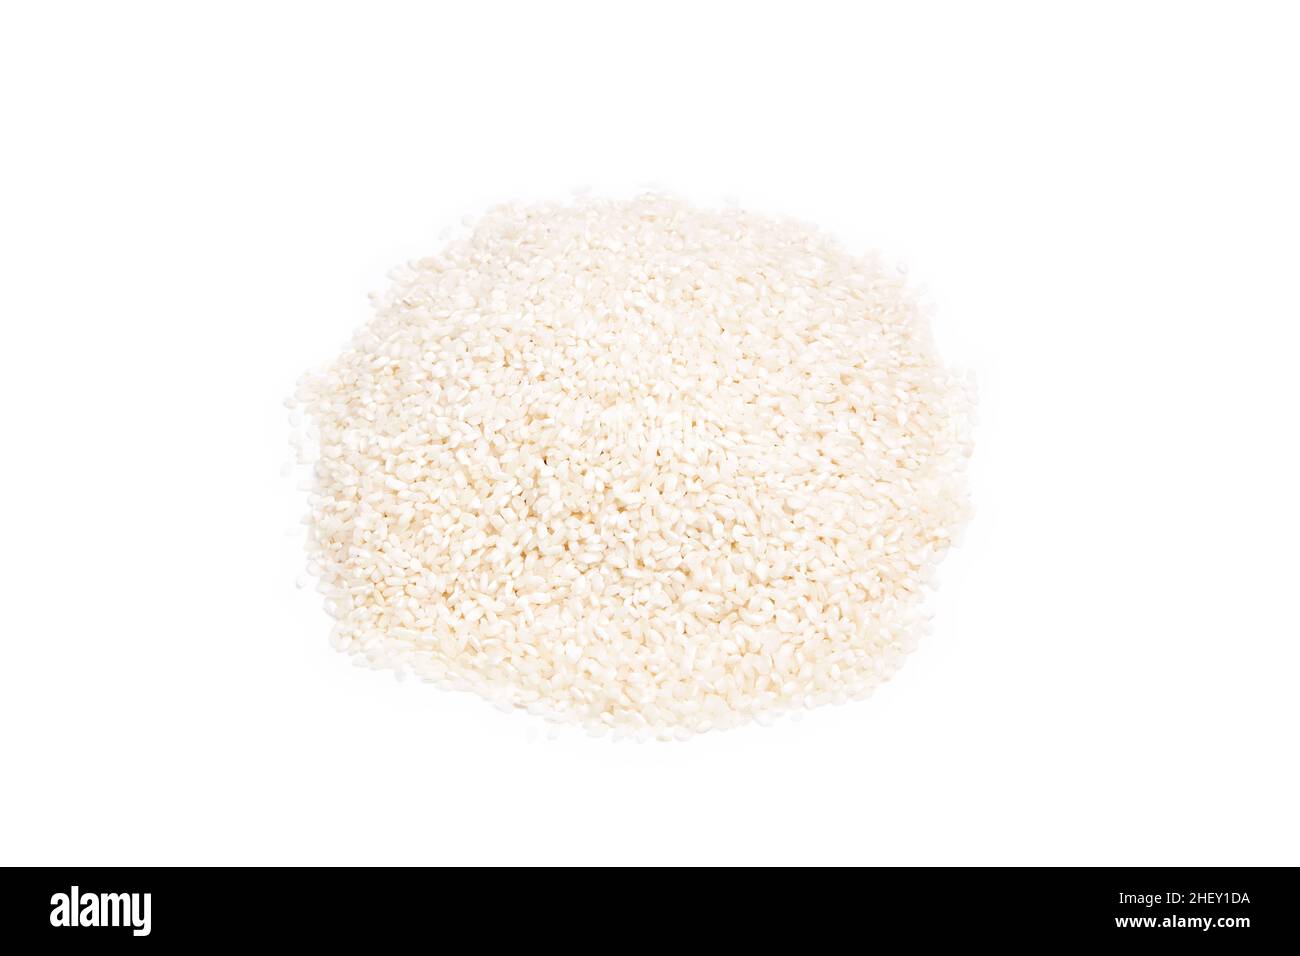 Pile of white rice grains on a white background. Oriental and healthy food Stock Photo